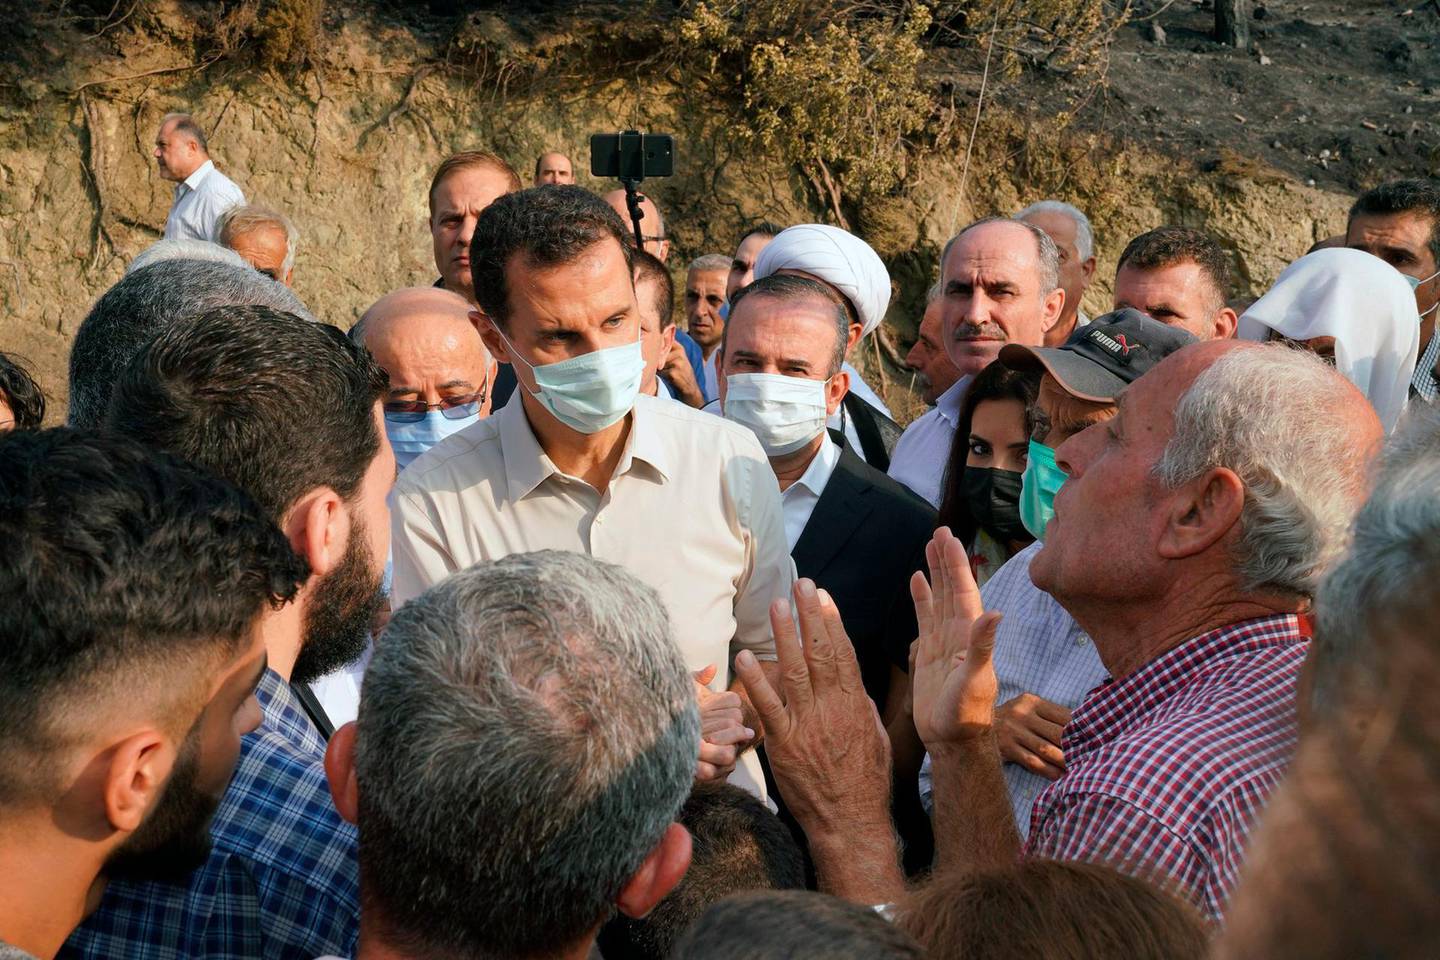 In this photo released Tuesday, Oct. 13, 2020 on the official Facebook page of the Syrian Presidency, Syrian President Bashar Assad, center, wearing a mask to help prevent the spread of the coronavirus, speaks with people during his visit to the coastal province of Latakia, Syria. Assad made a rare public visit to Latakia where he toured areas that suffered heavy damage in last weekâ€™s deadly wildfires. (Syrian Presidency via Facebook via AP)